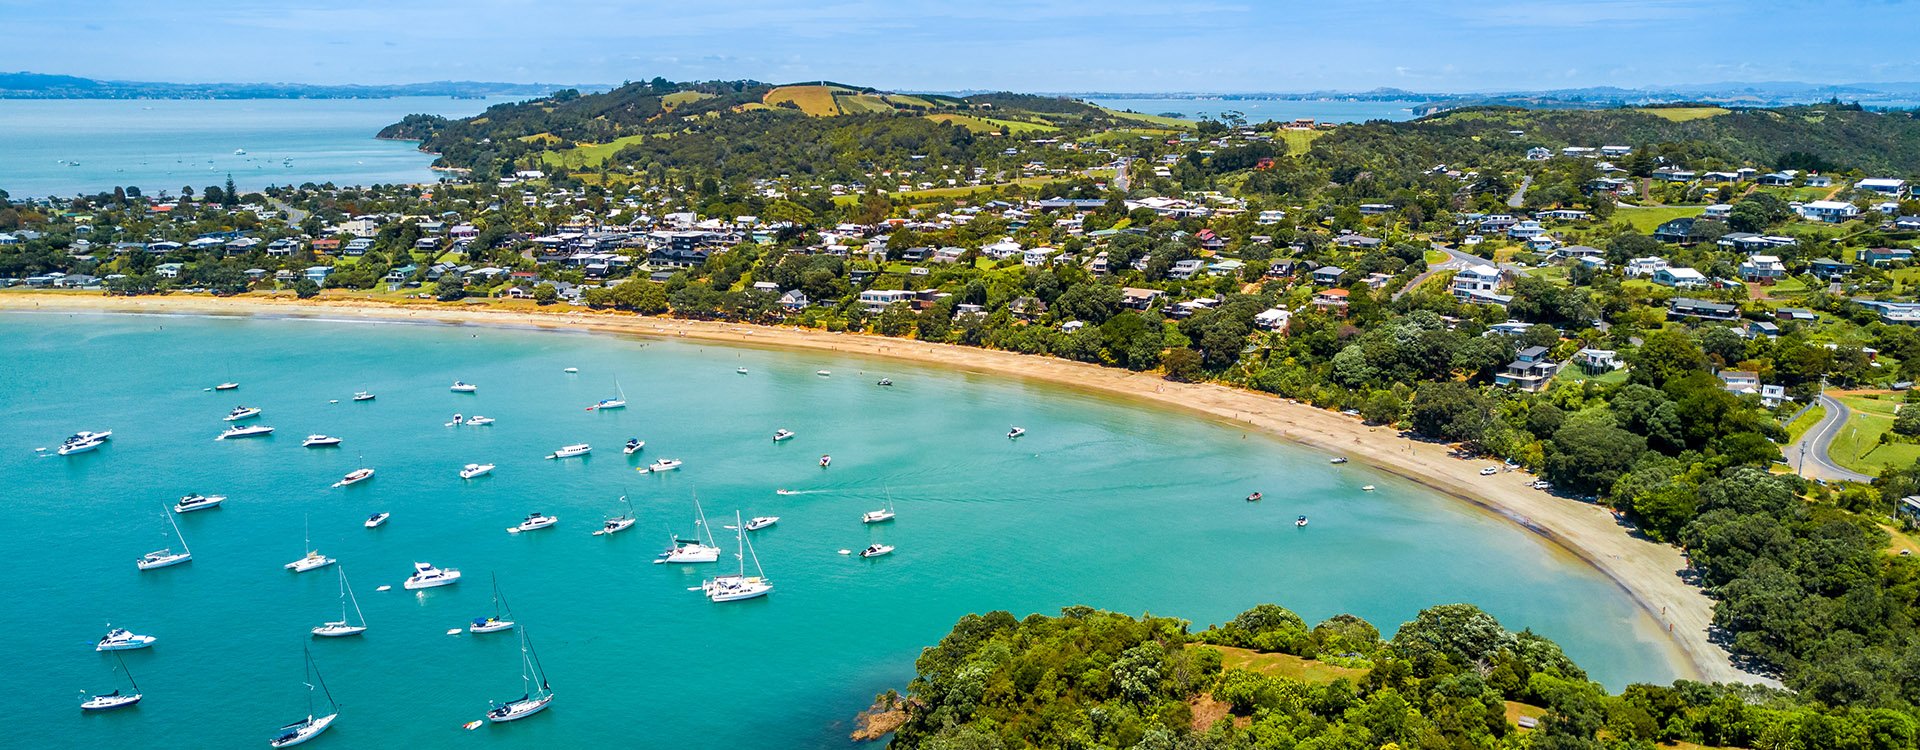 Bay at sunny day with sandy beach and residential suburbs, Waiheke Island, Auckland, New Zealand